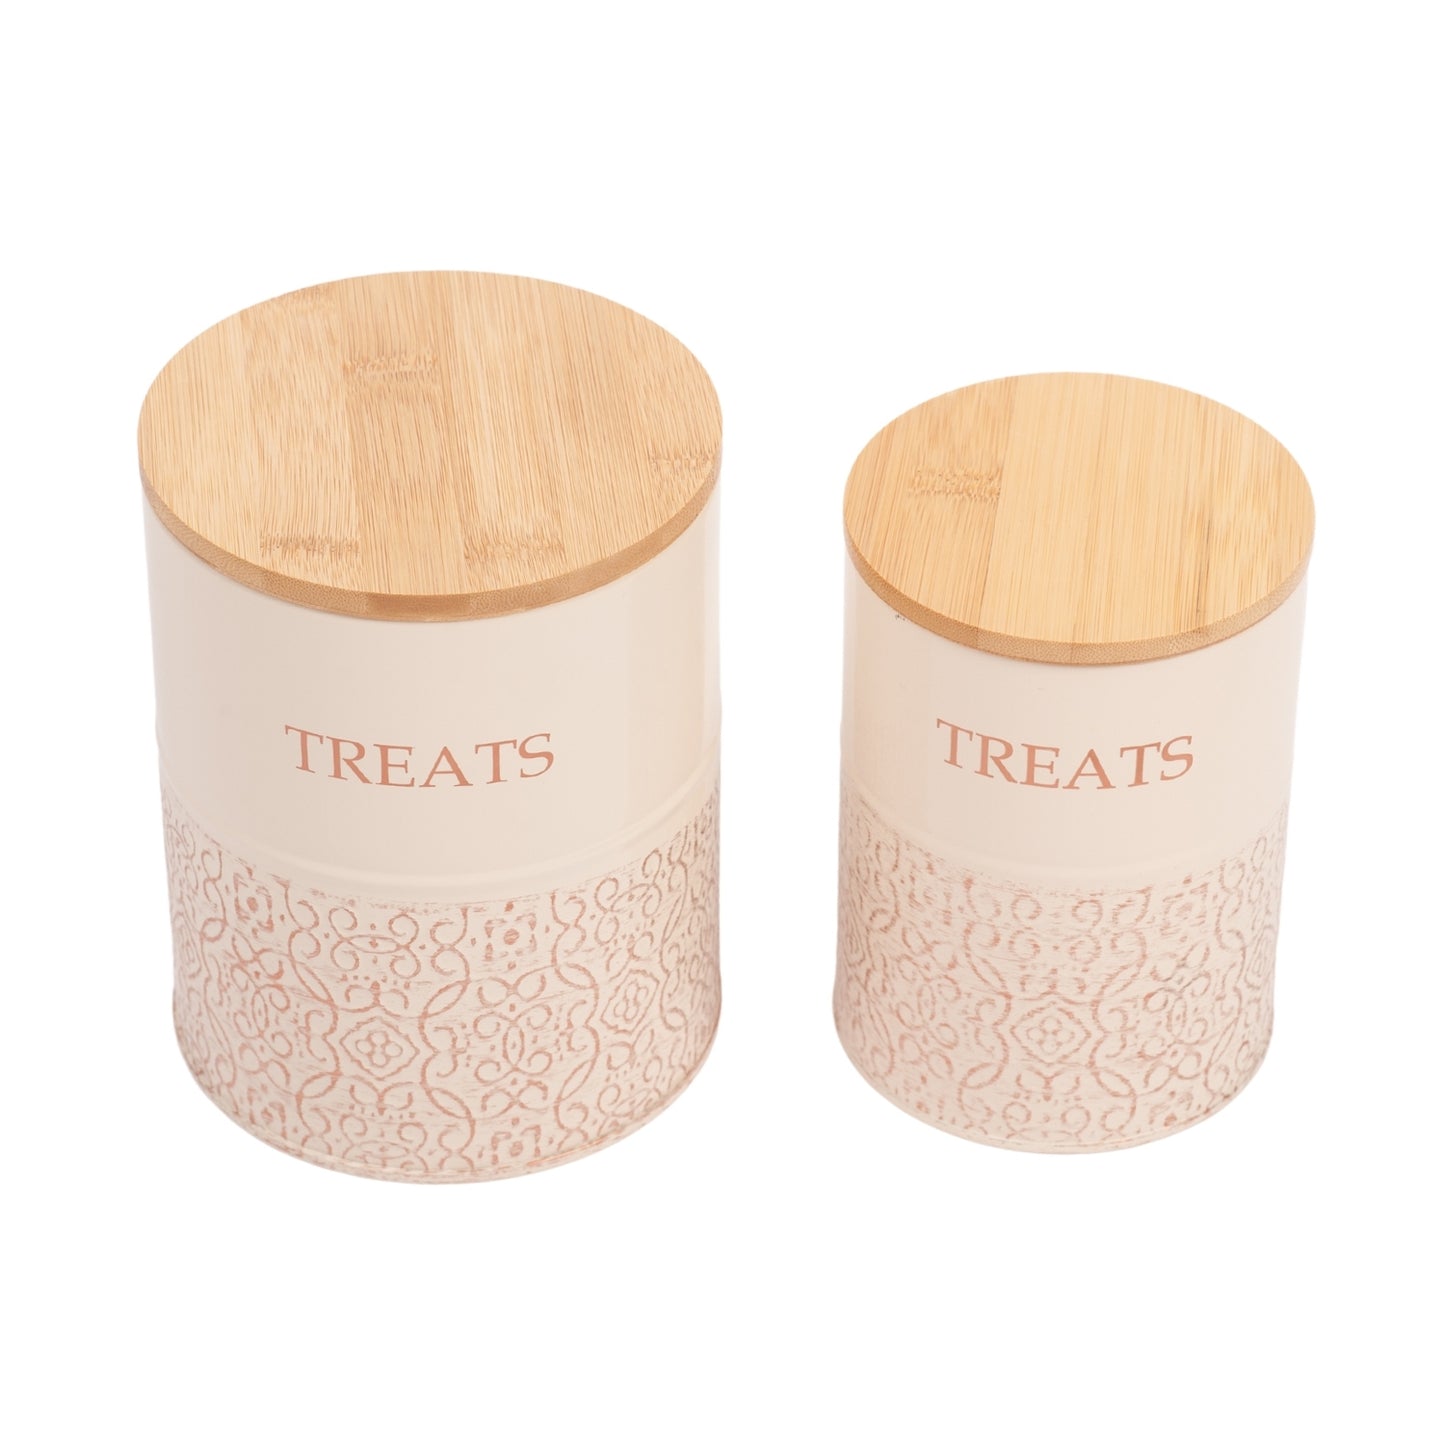 Country Living White Swan Dog Treat Containers - Set of 2 Carbon Steel Jars with Bamboo Lids - Stylish Storage for Your Furry Friend's Treats